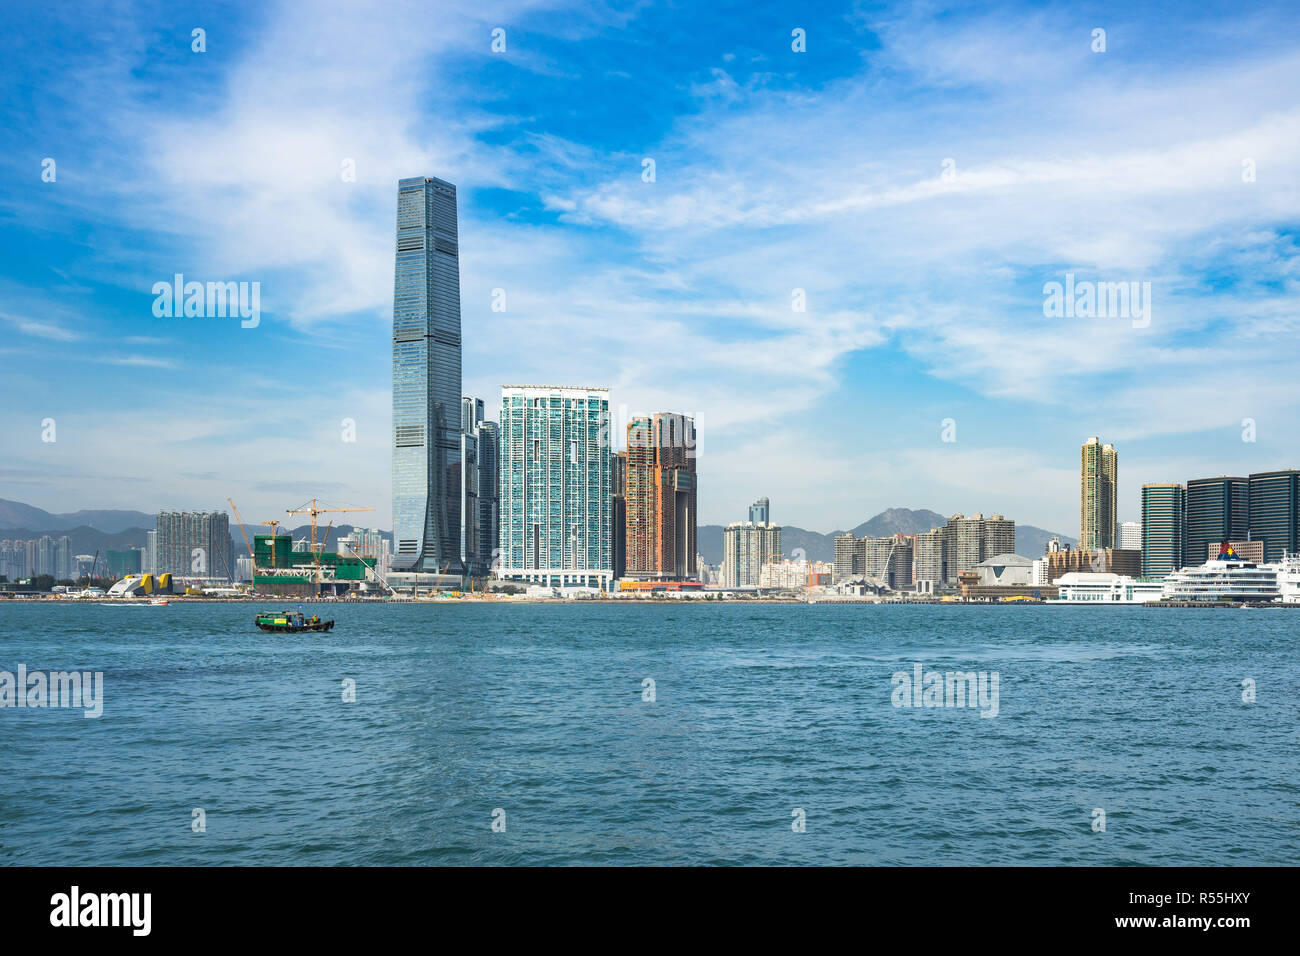 Kowloon skyline and International Commerce Center (ICC), the tallest skyscraper in Hong Kong Stock Photo